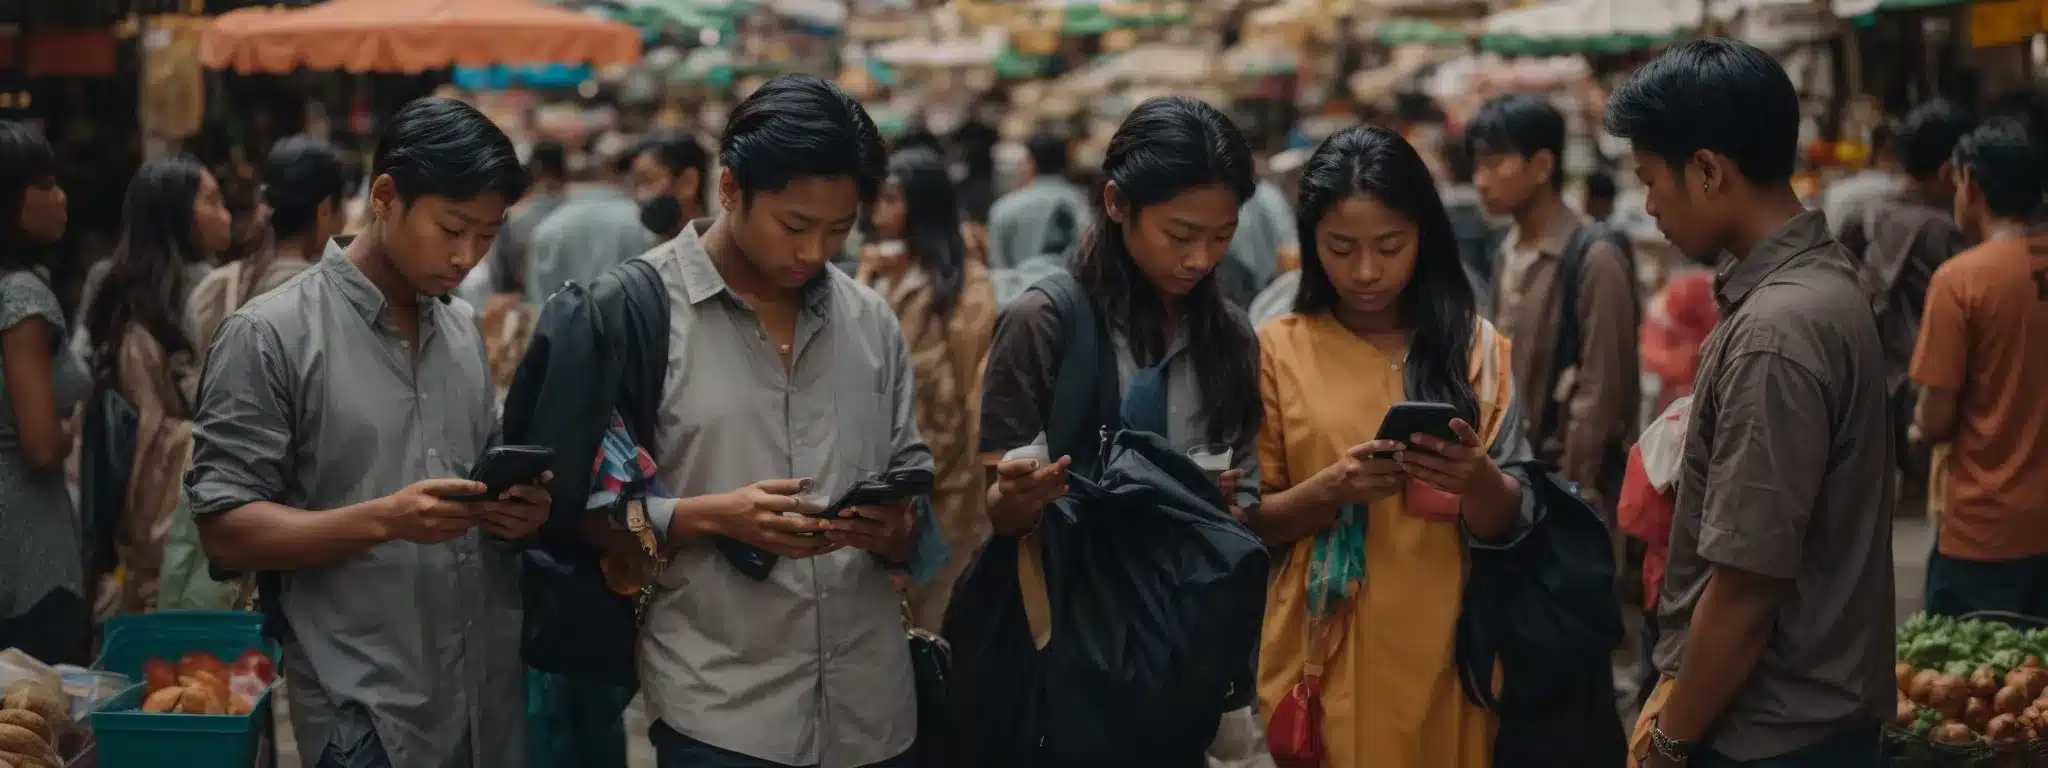 A Diverse Group Of People Engrossed In Their Smartphones Amidst A Vibrant Marketplace.